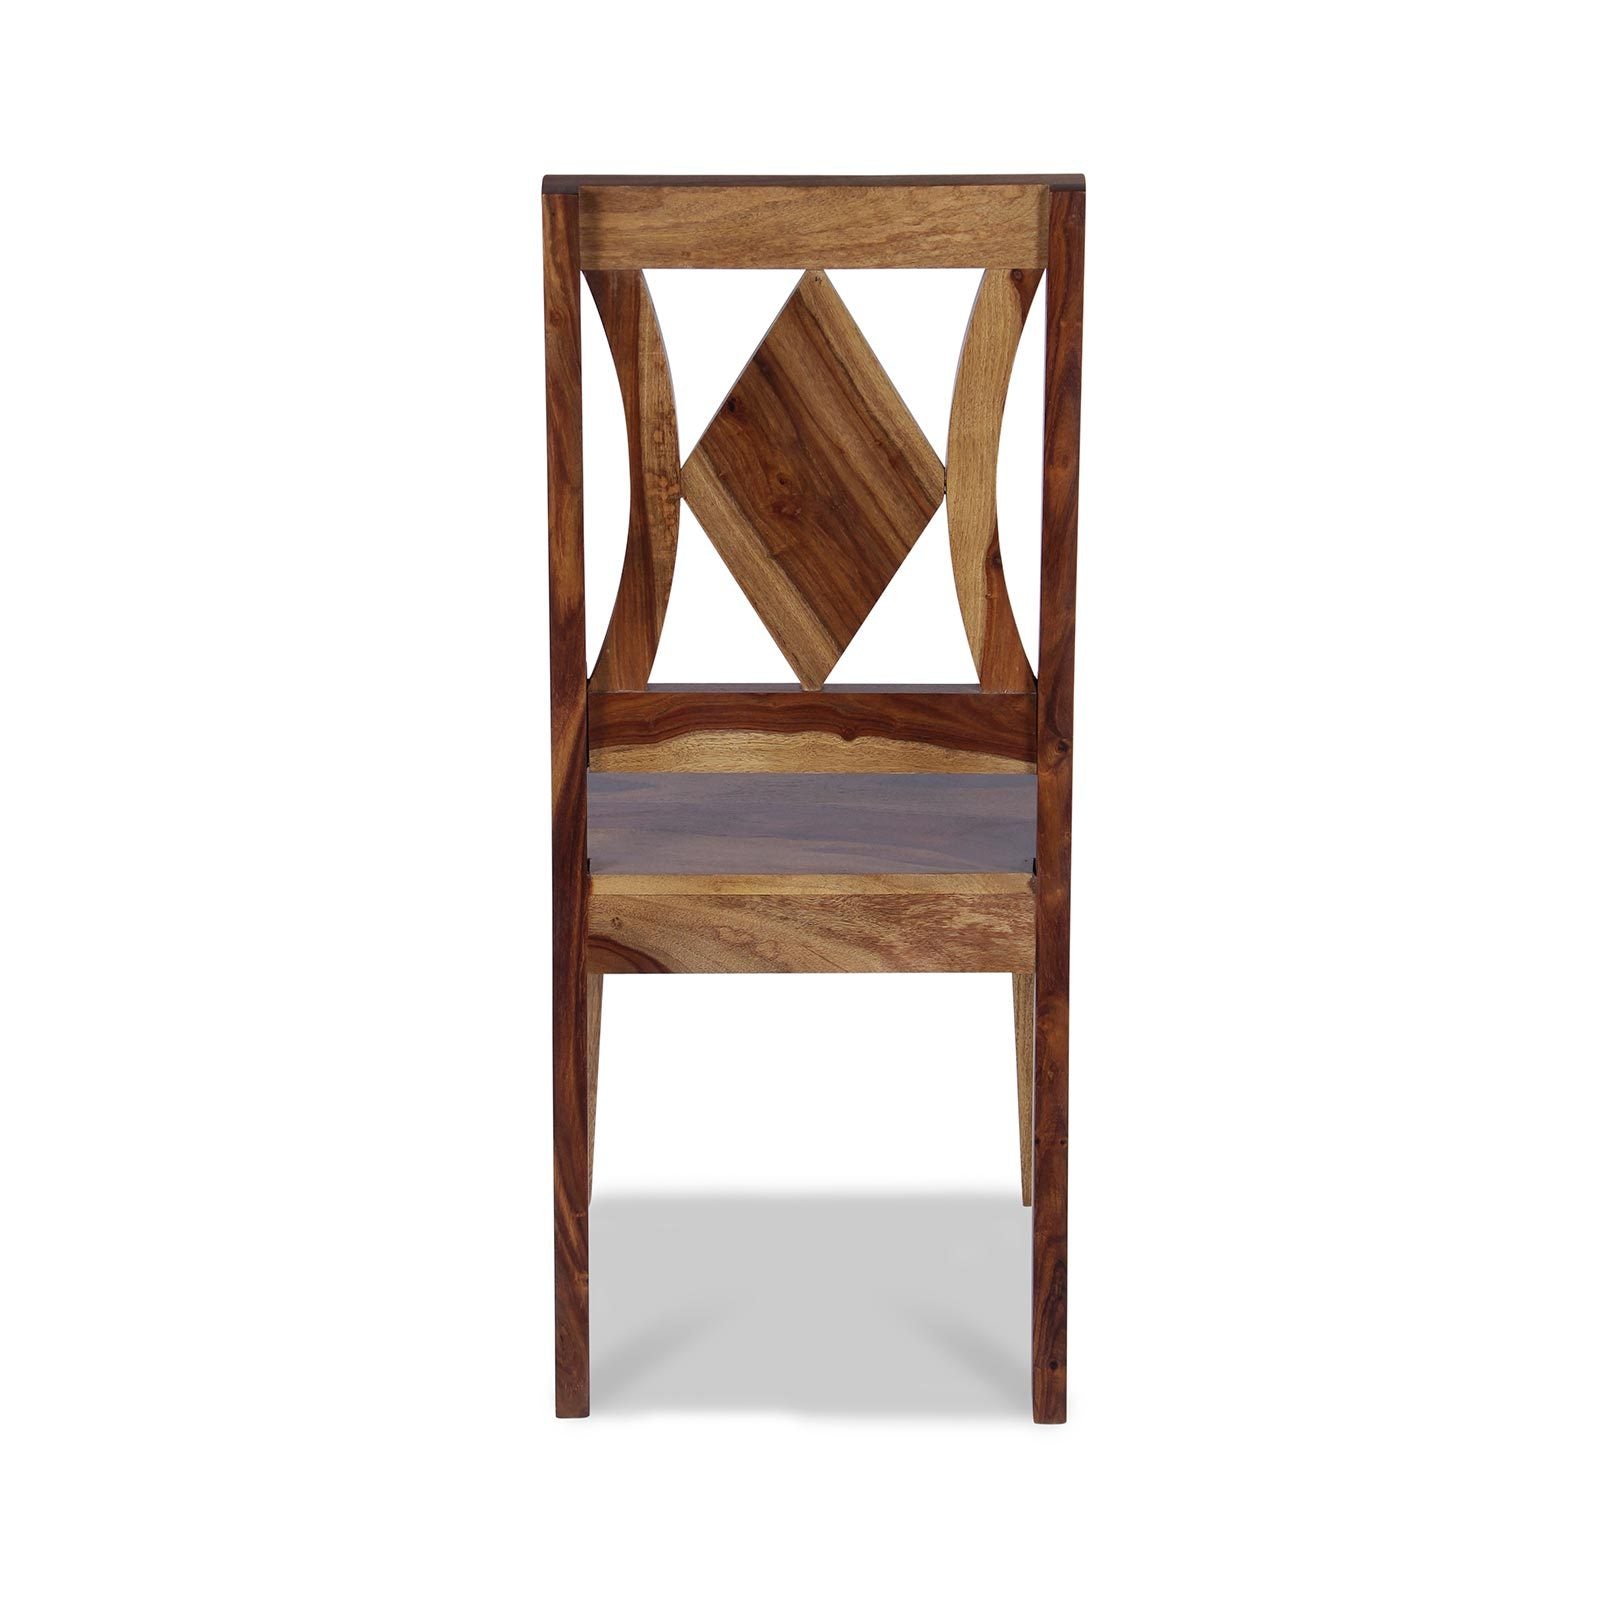 Buy Wooden chairs